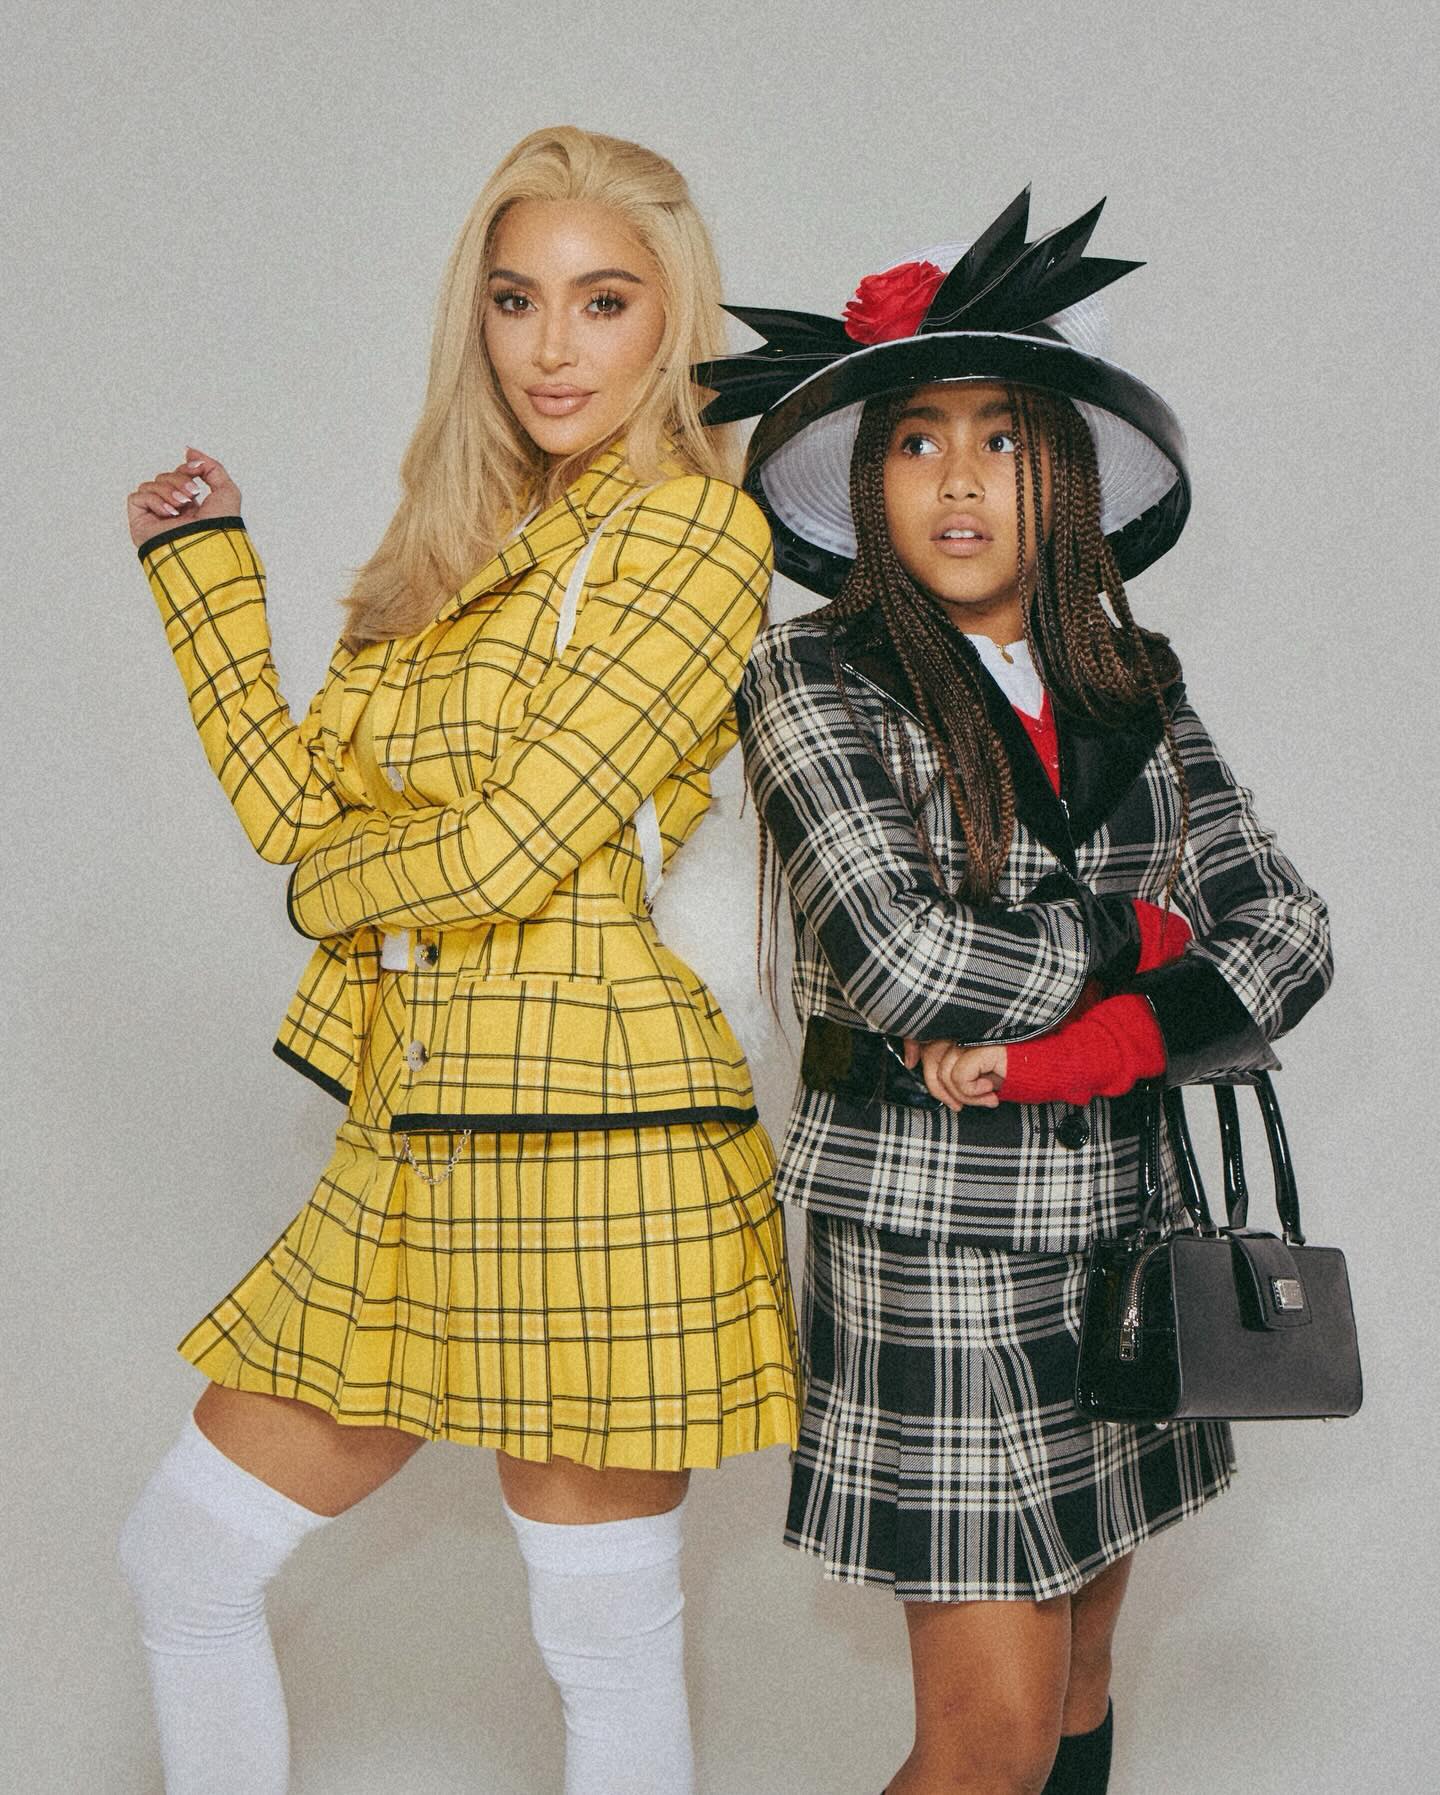 likhoa young kim kardashian with silver hair and north west suddenly shared photos recreating their favorite characters on halloween 6540d9dce7c2c Young Kim Kardashian With Silver Hair And North West Suddenly Shared Photos Recreating Their Favorite Characters On Halloween 2023.